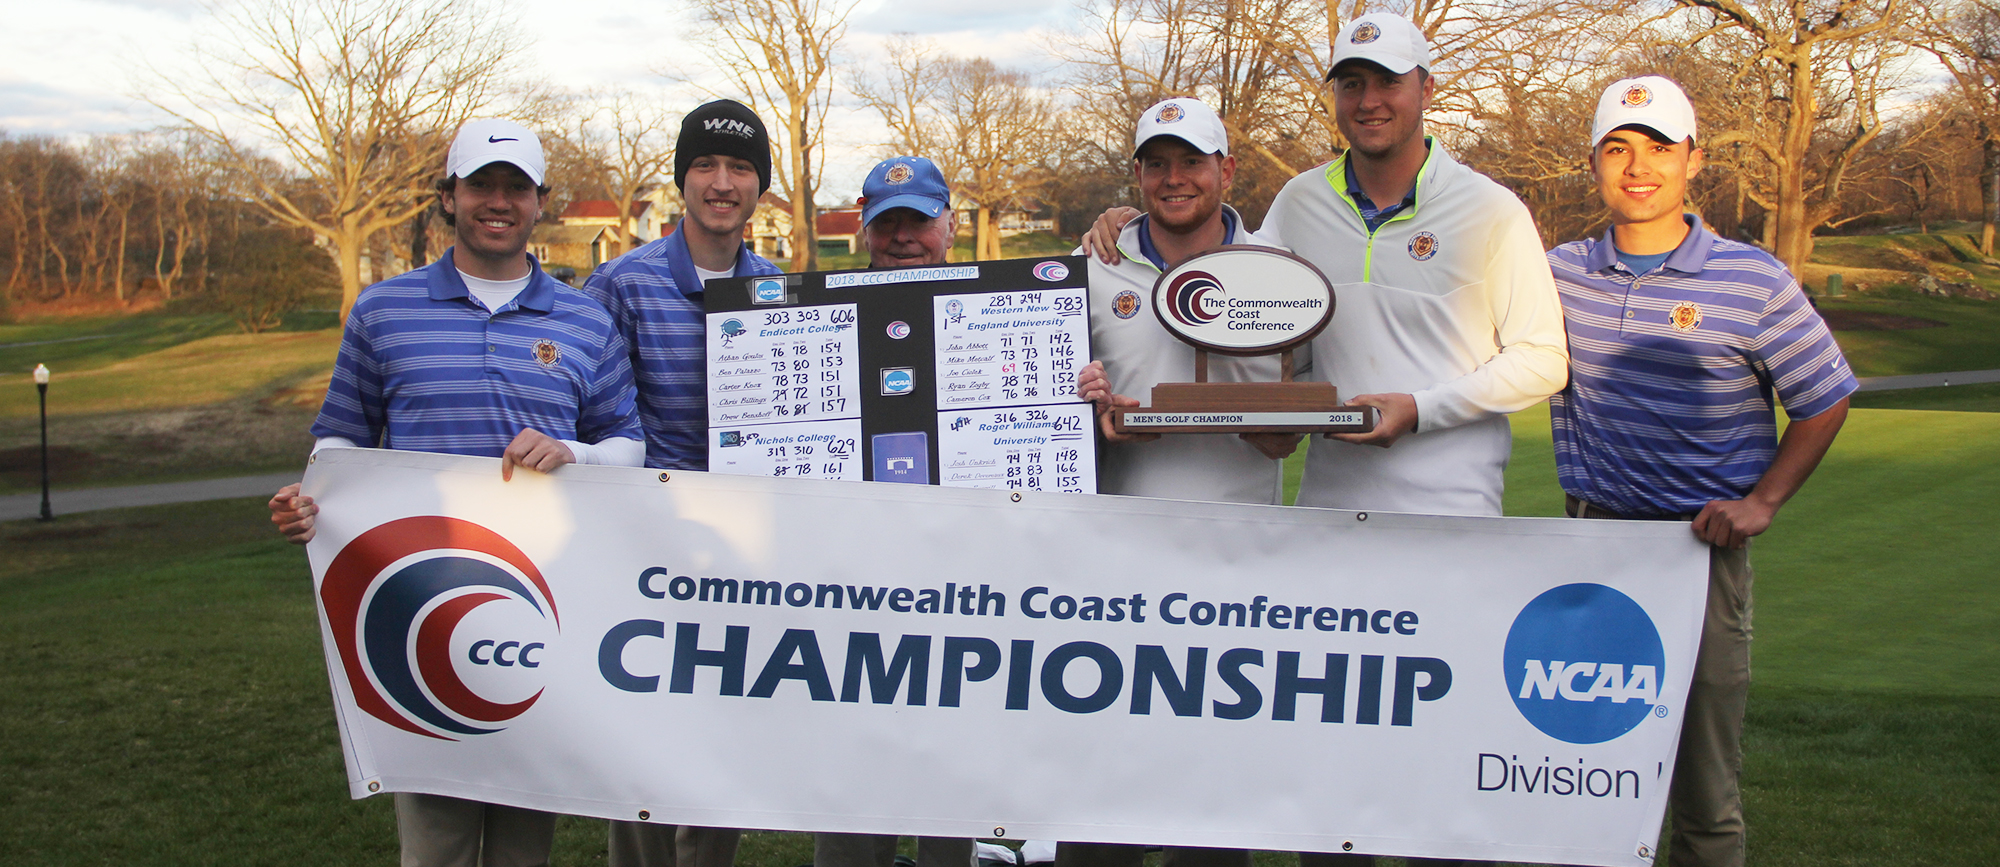 Western New England captured its fourth CCC title by 20 strokes over the weekend at Kernwood Country Club in Salem, Mass.